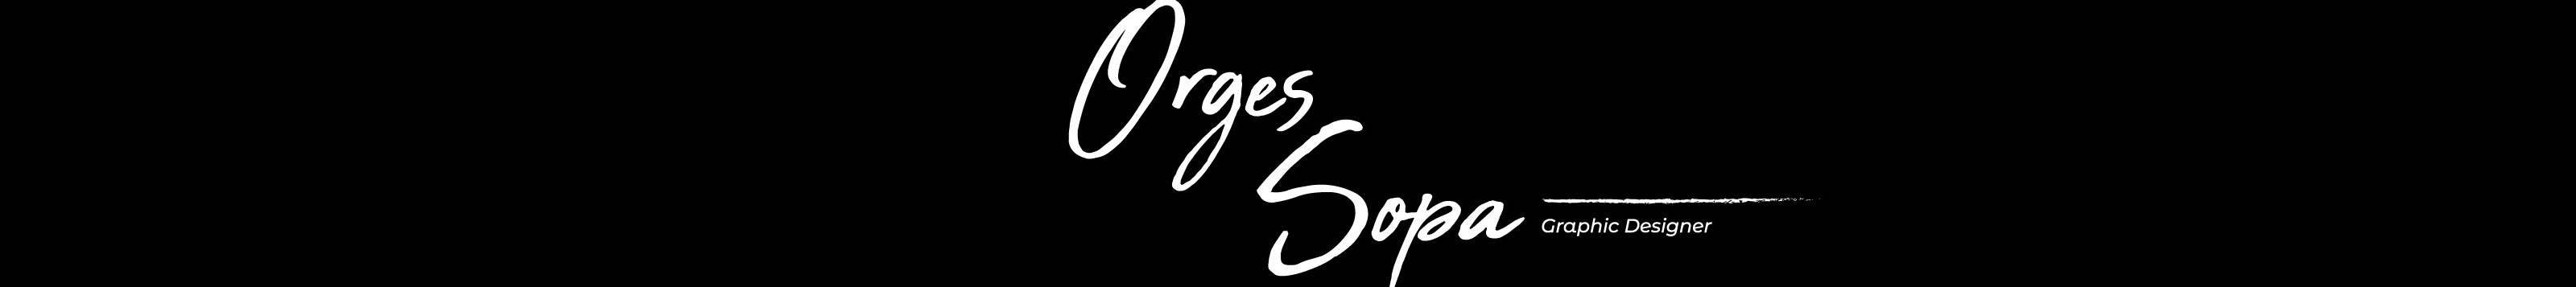 Orges Sopa's profile banner